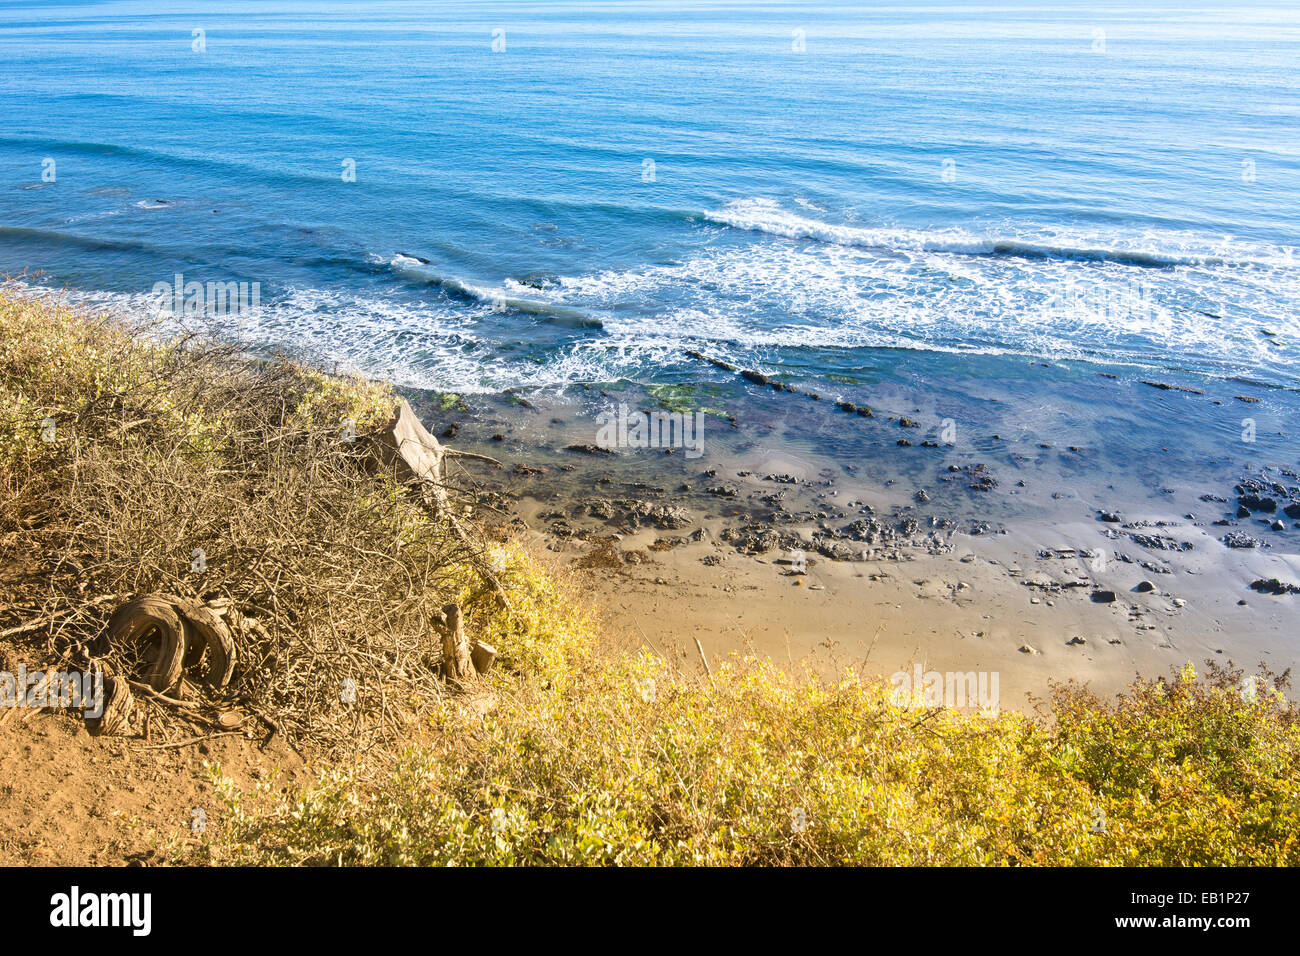 View of beach and reef in Santa Barbara, California from behind colorful foliage on a cliff. Stock Photo